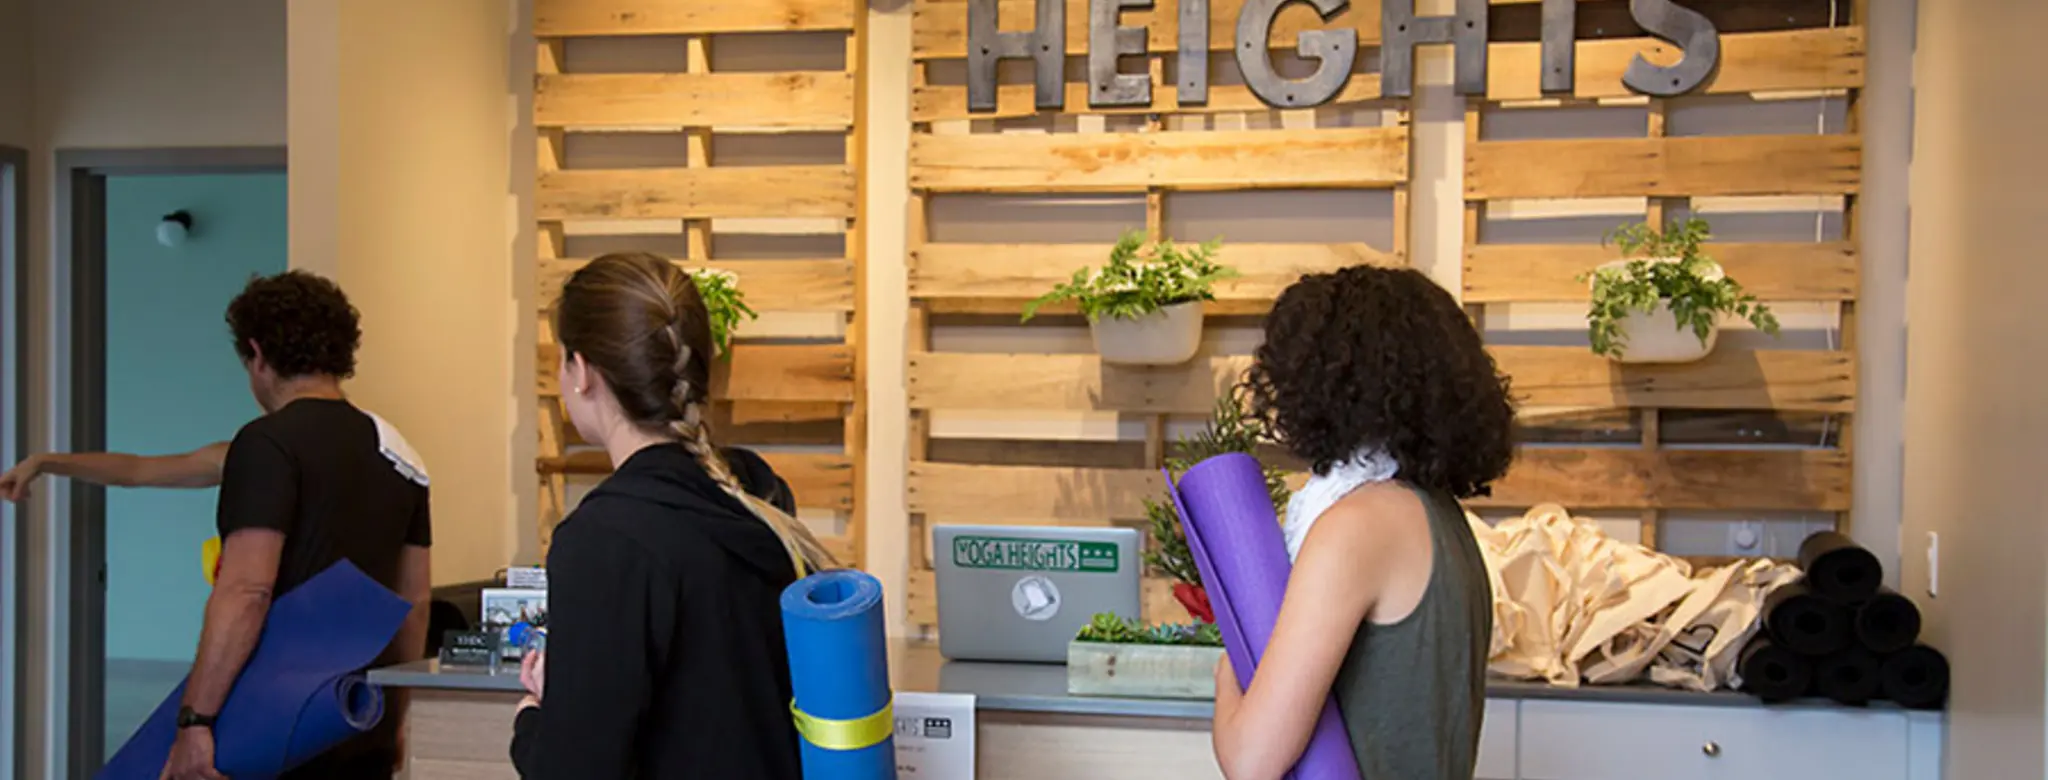 Students checking into class at Yoga Heights